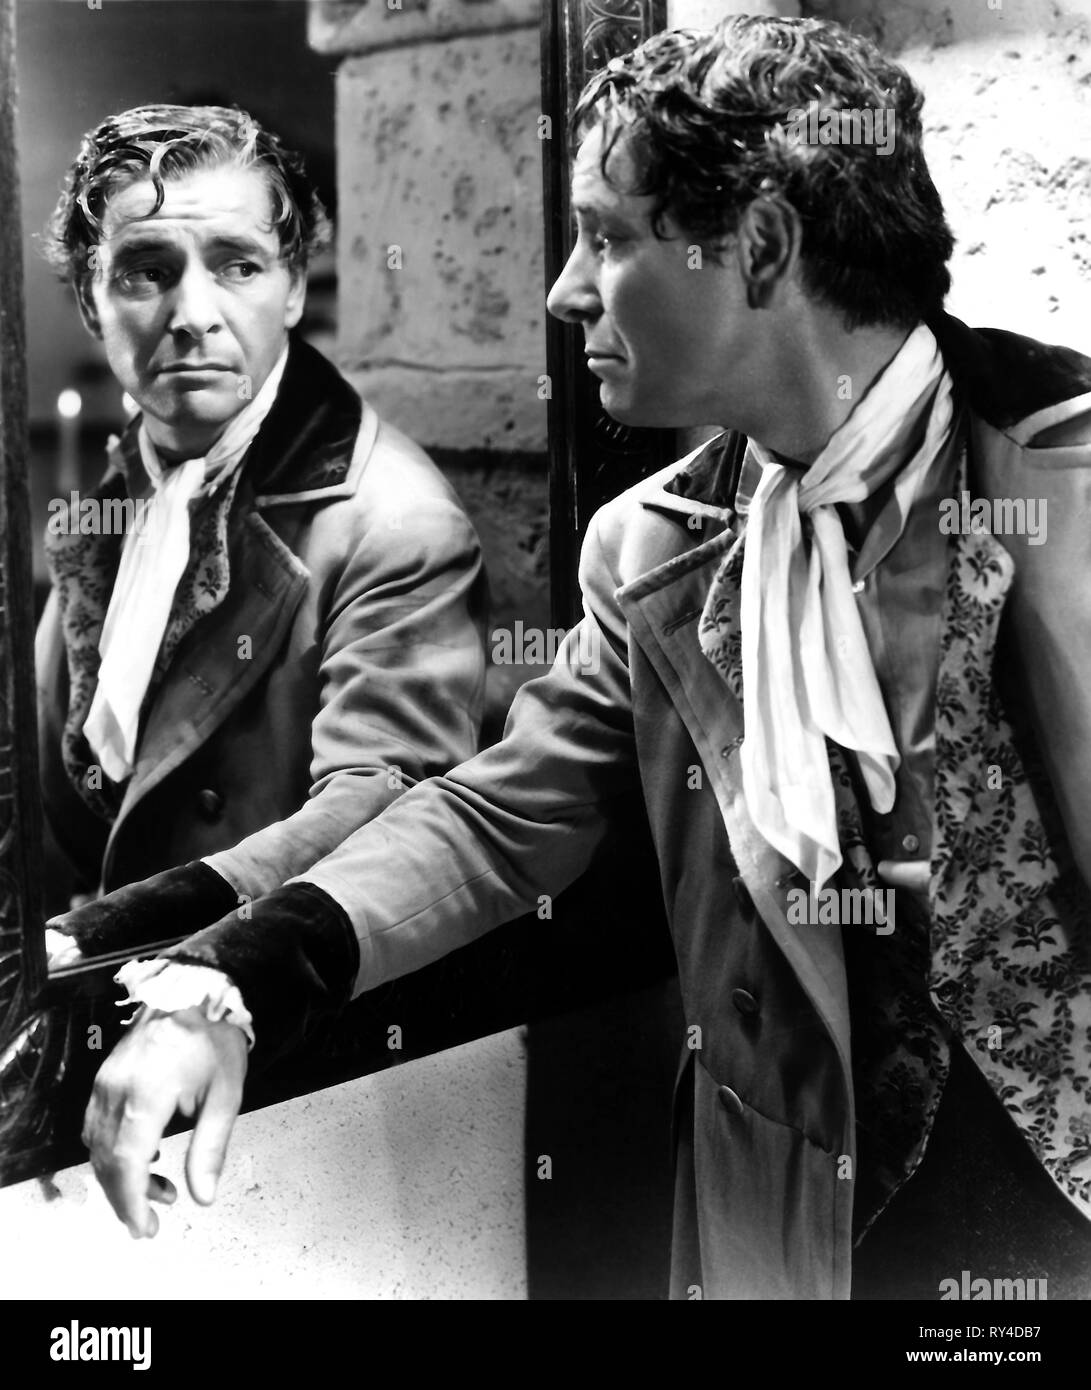 RONALD COLMAN, A TALE OF TWO CITIES, 1935 Stock Photo